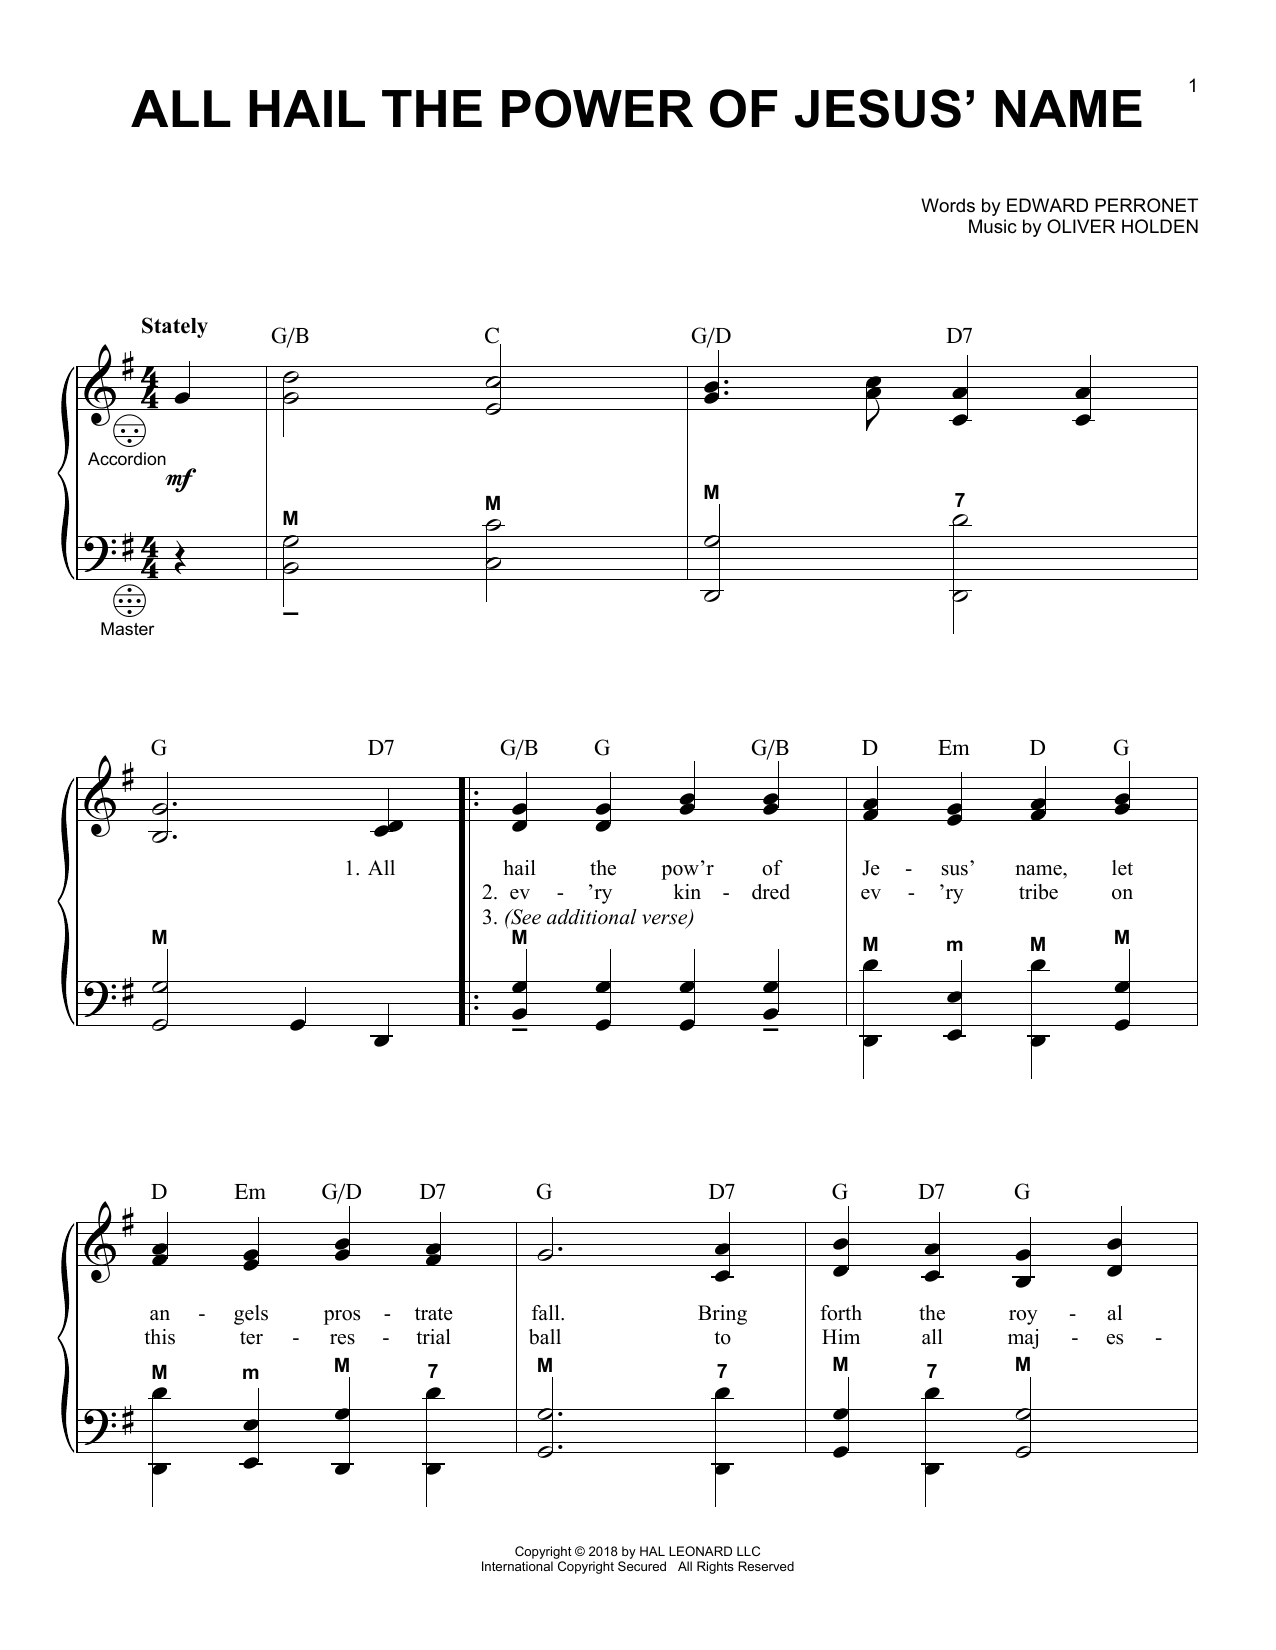 Download Edward Perronet All Hail The Power Of Jesus' Name Sheet Music